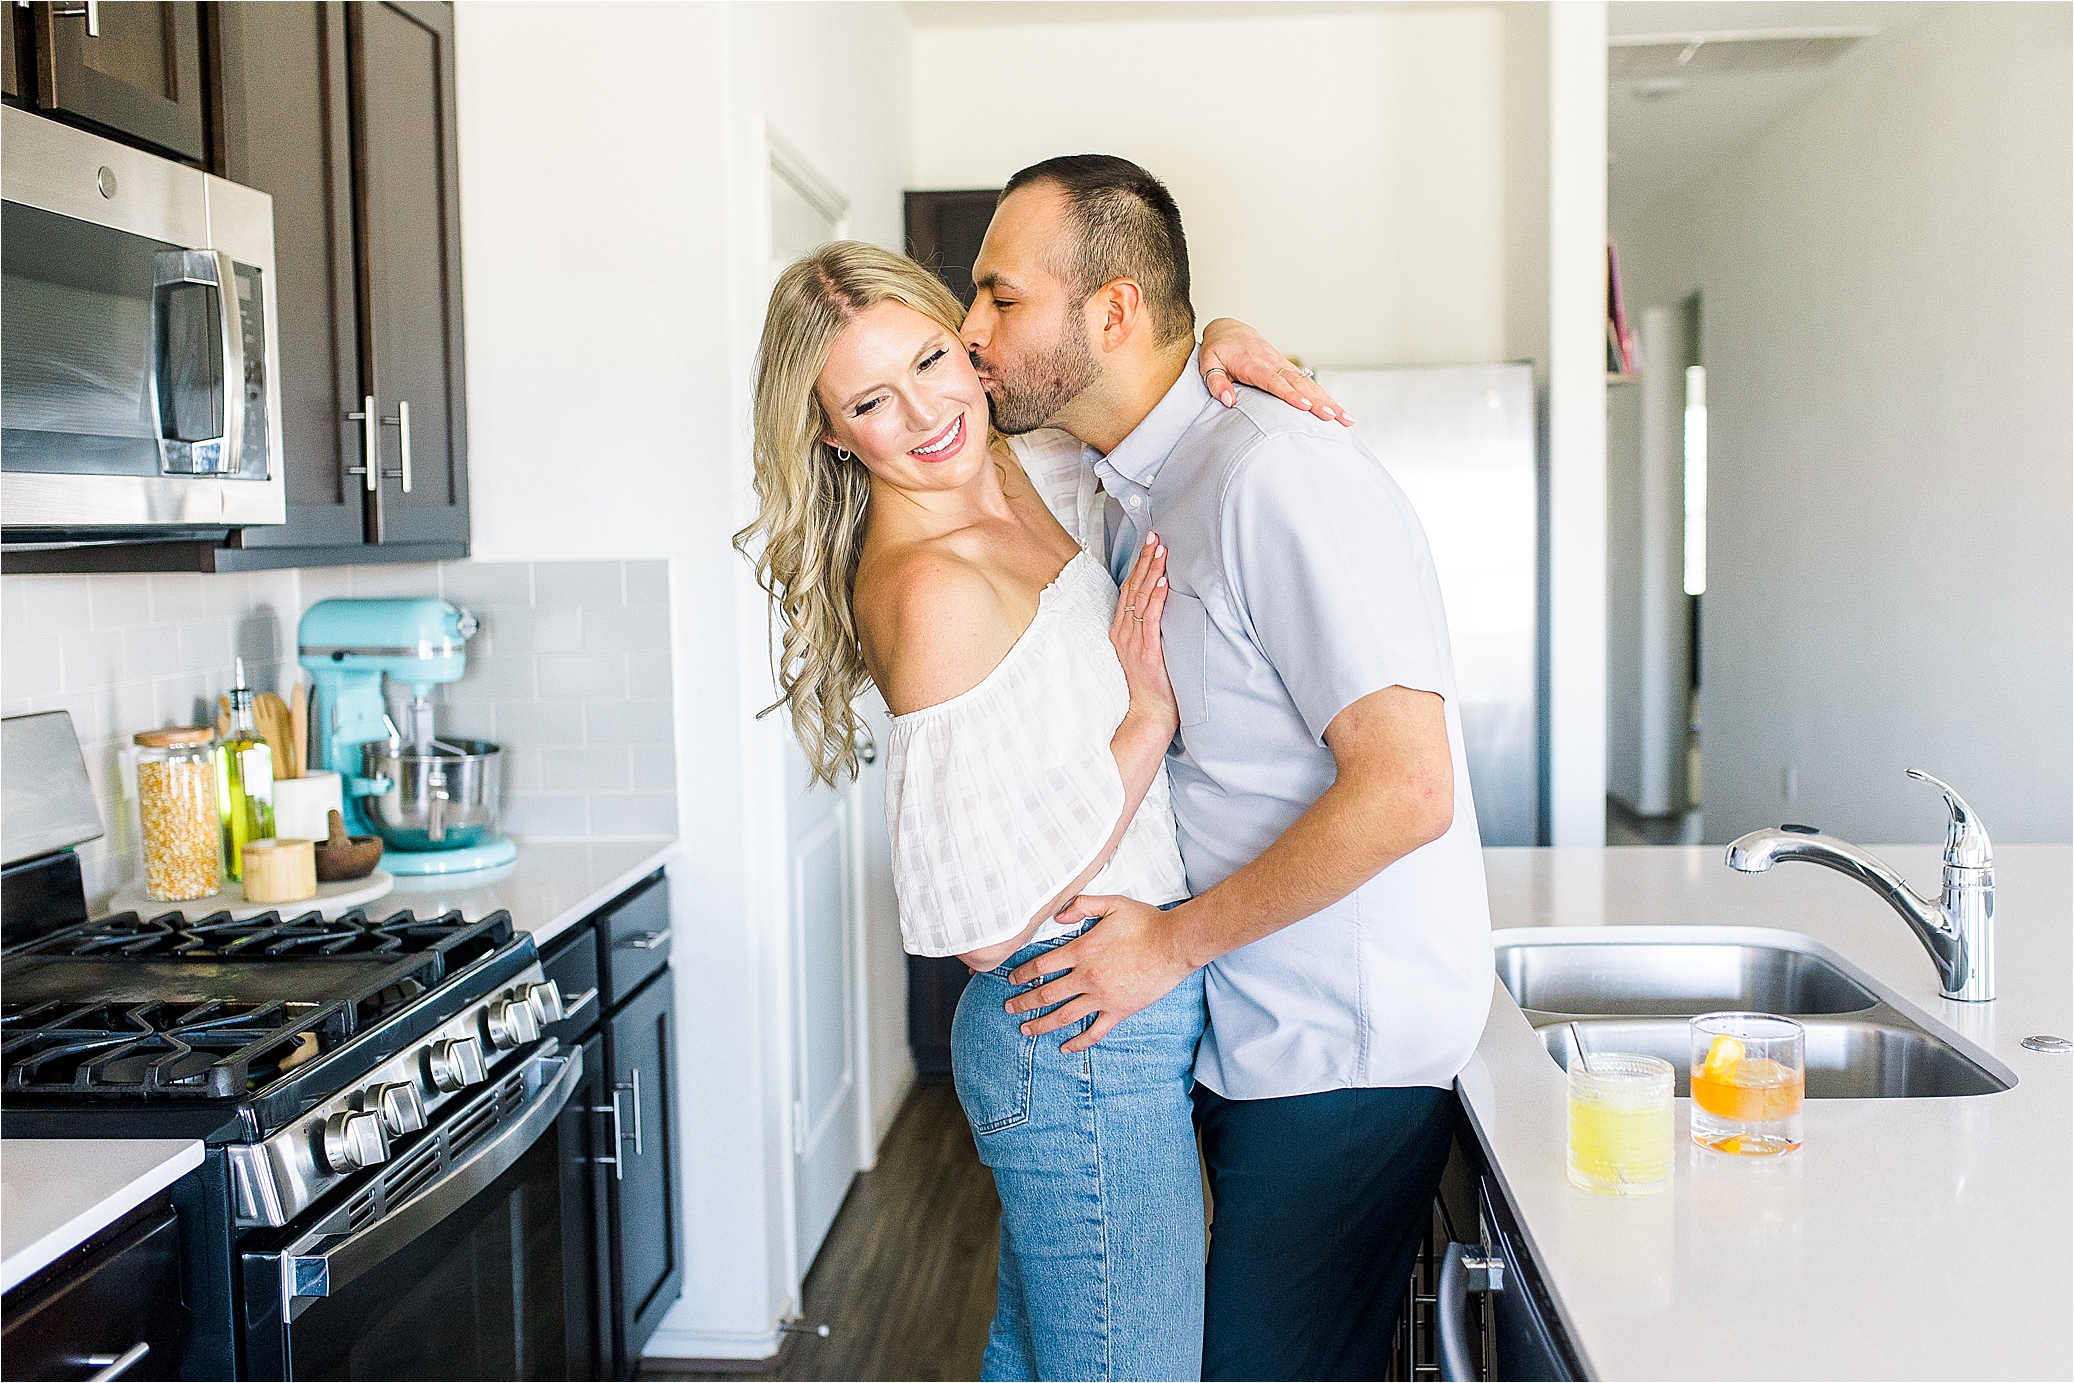 A guy kisses his fiance on the cheek in their kitchen for their at home engagement session in Austin, Texas